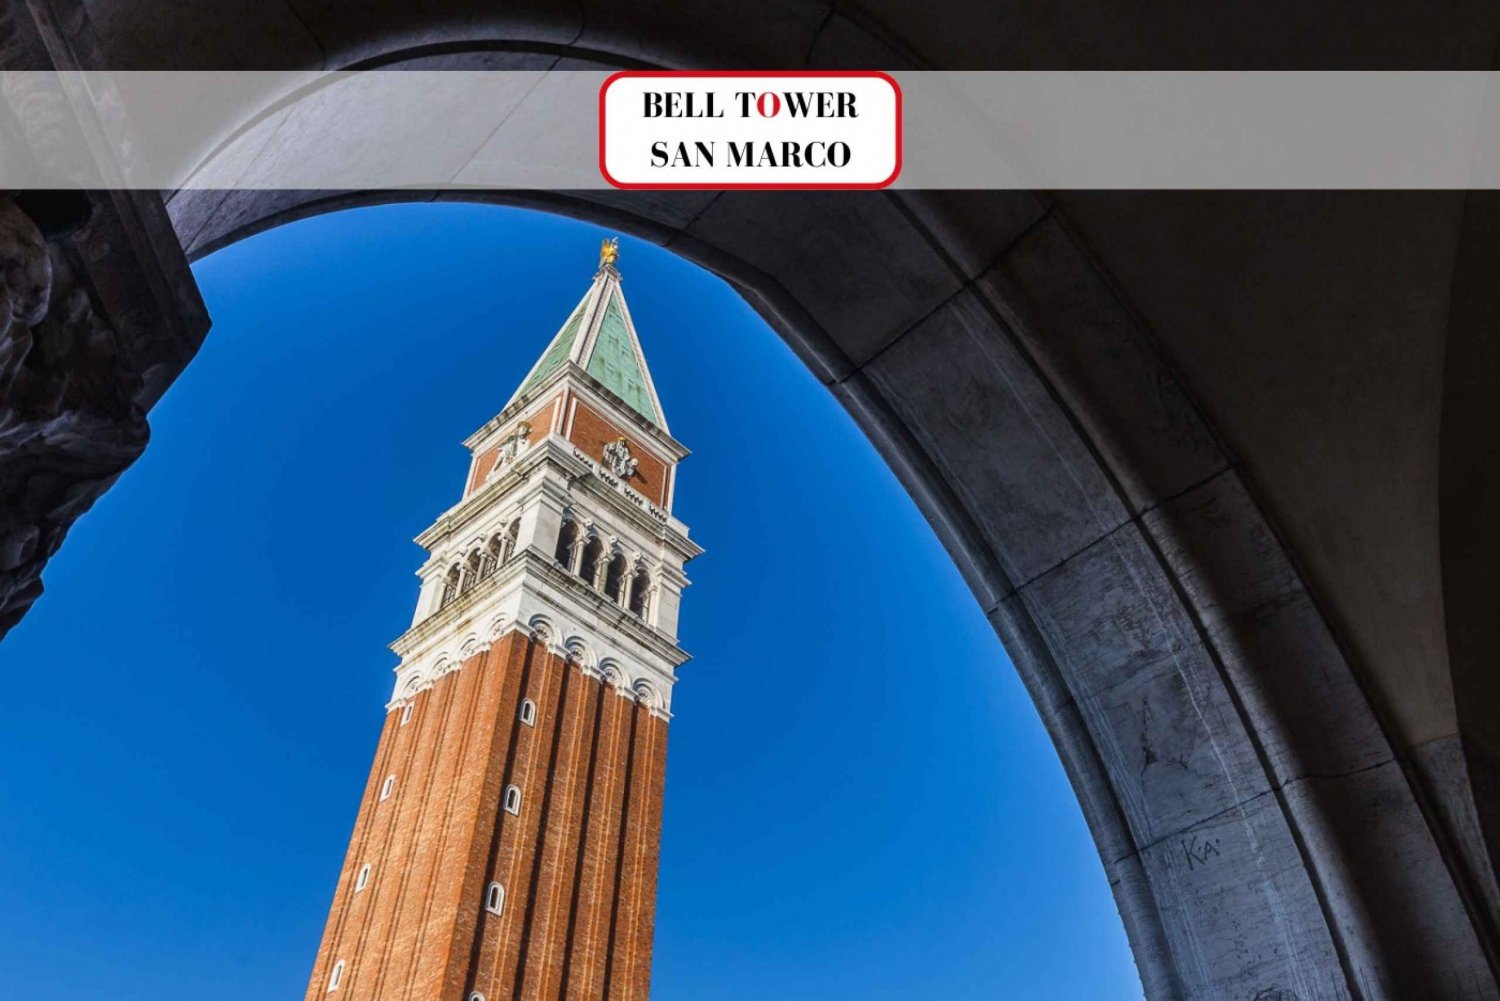 Venice: Bell Tower and San Marco Yard Gallery Tickets